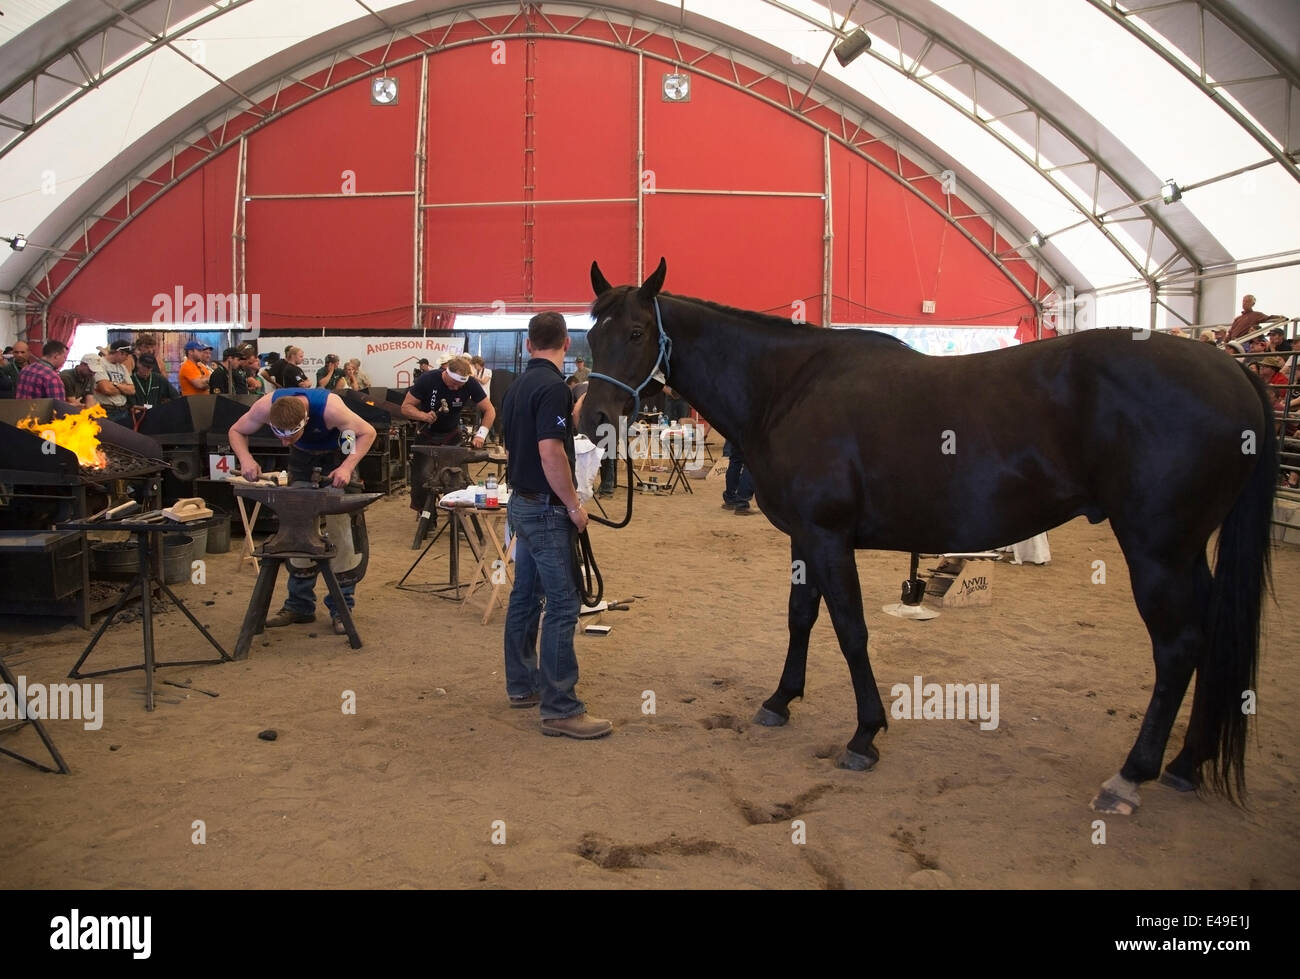 Calgary, Alberta, Canada. 06th July, 2014. Farriers forgeing horse shoes as they compete in the final round of the World Championships Blacksmiths' competition at the Calgary Stampede on Sunday, July 6, 2014. The top five farriers are competing for the title of world champion in this longstanding tradition at the Stampede. Calgary, Alberta, Canada. Credit:  Rosanne Tackaberry/Alamy Live News Stock Photo